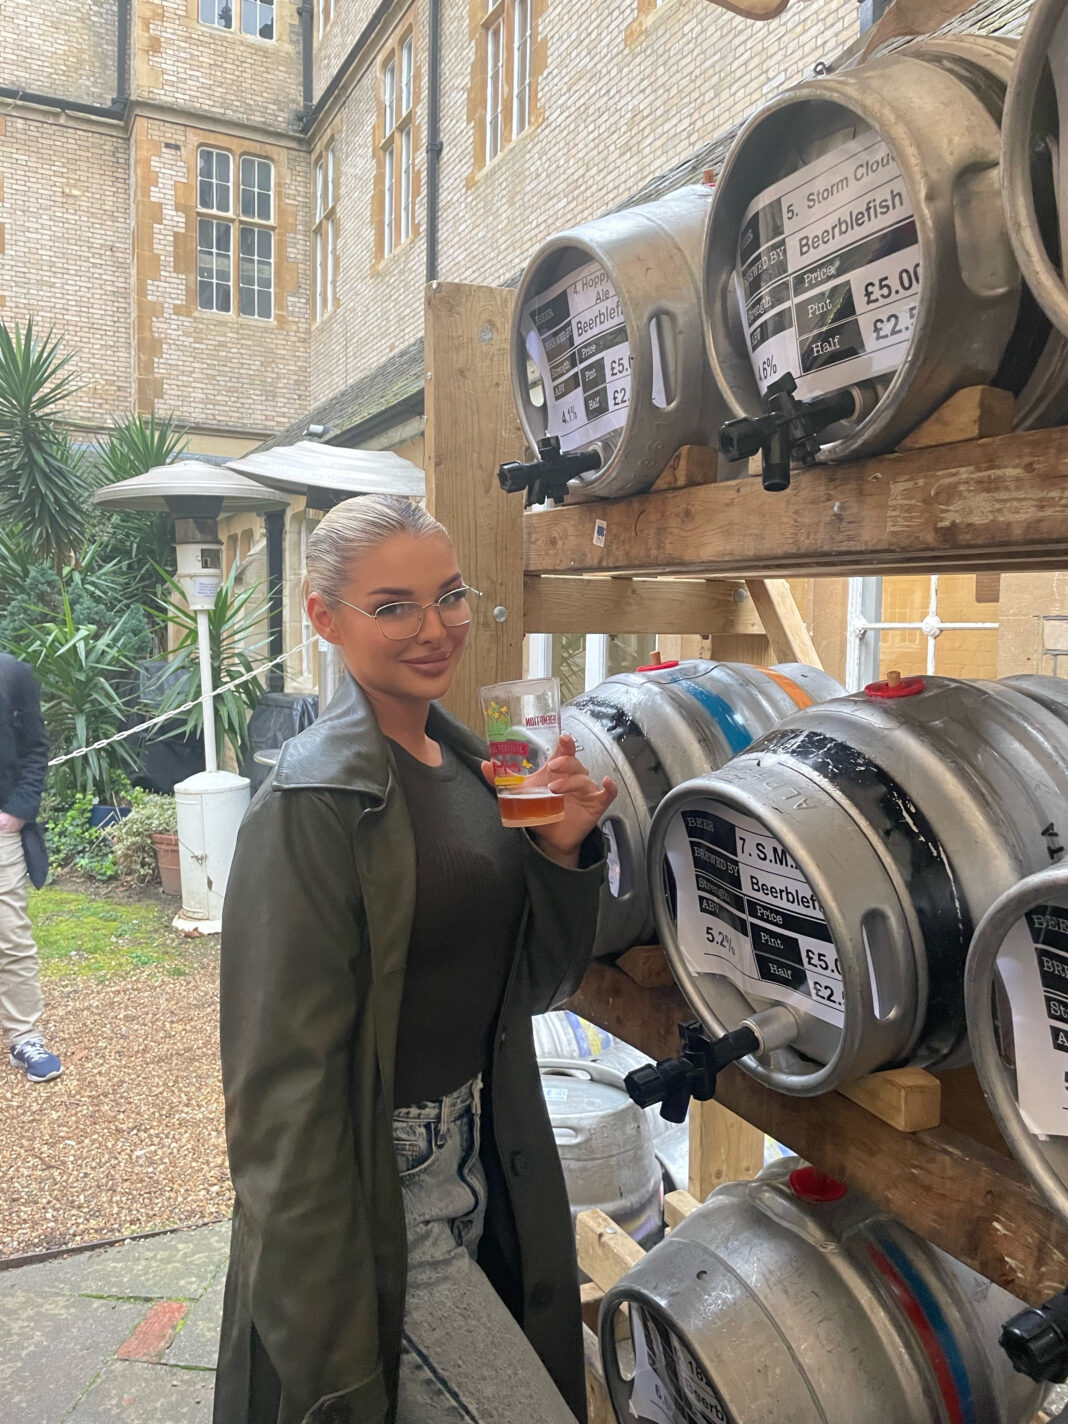 Wandsworth Common beer and cider festival